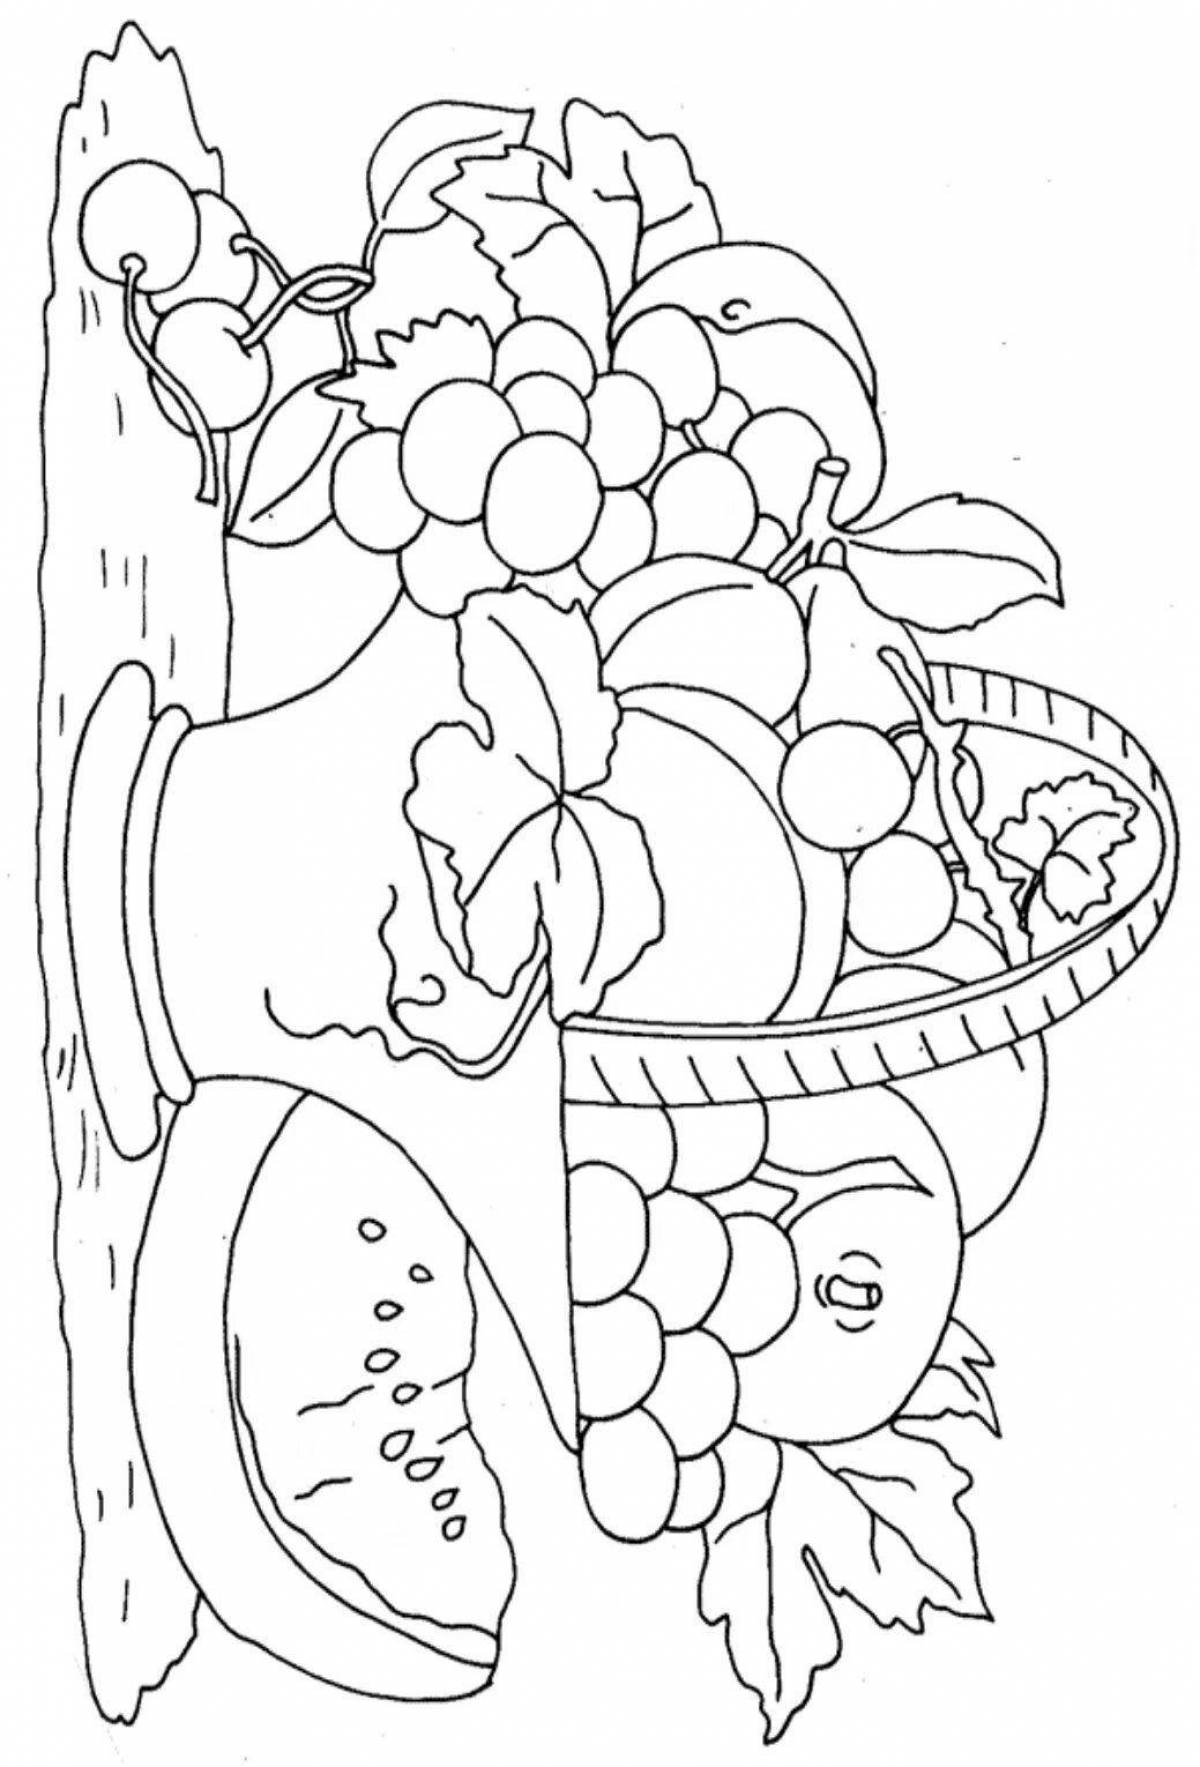 Creative still life coloring book for 10 year olds